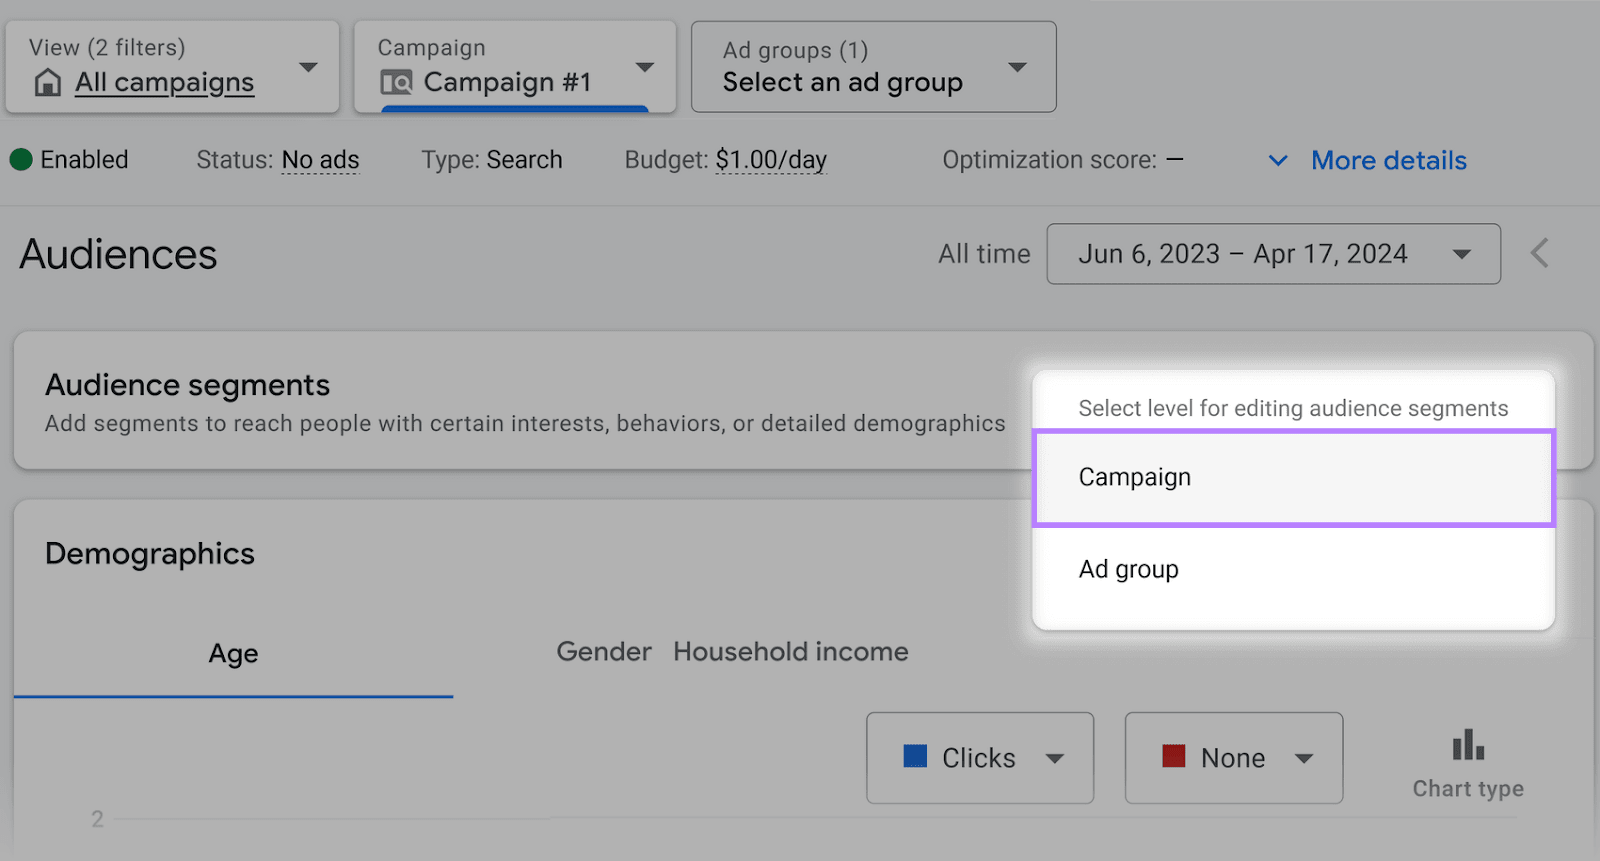 "Campaigns" option selected from the pop-up